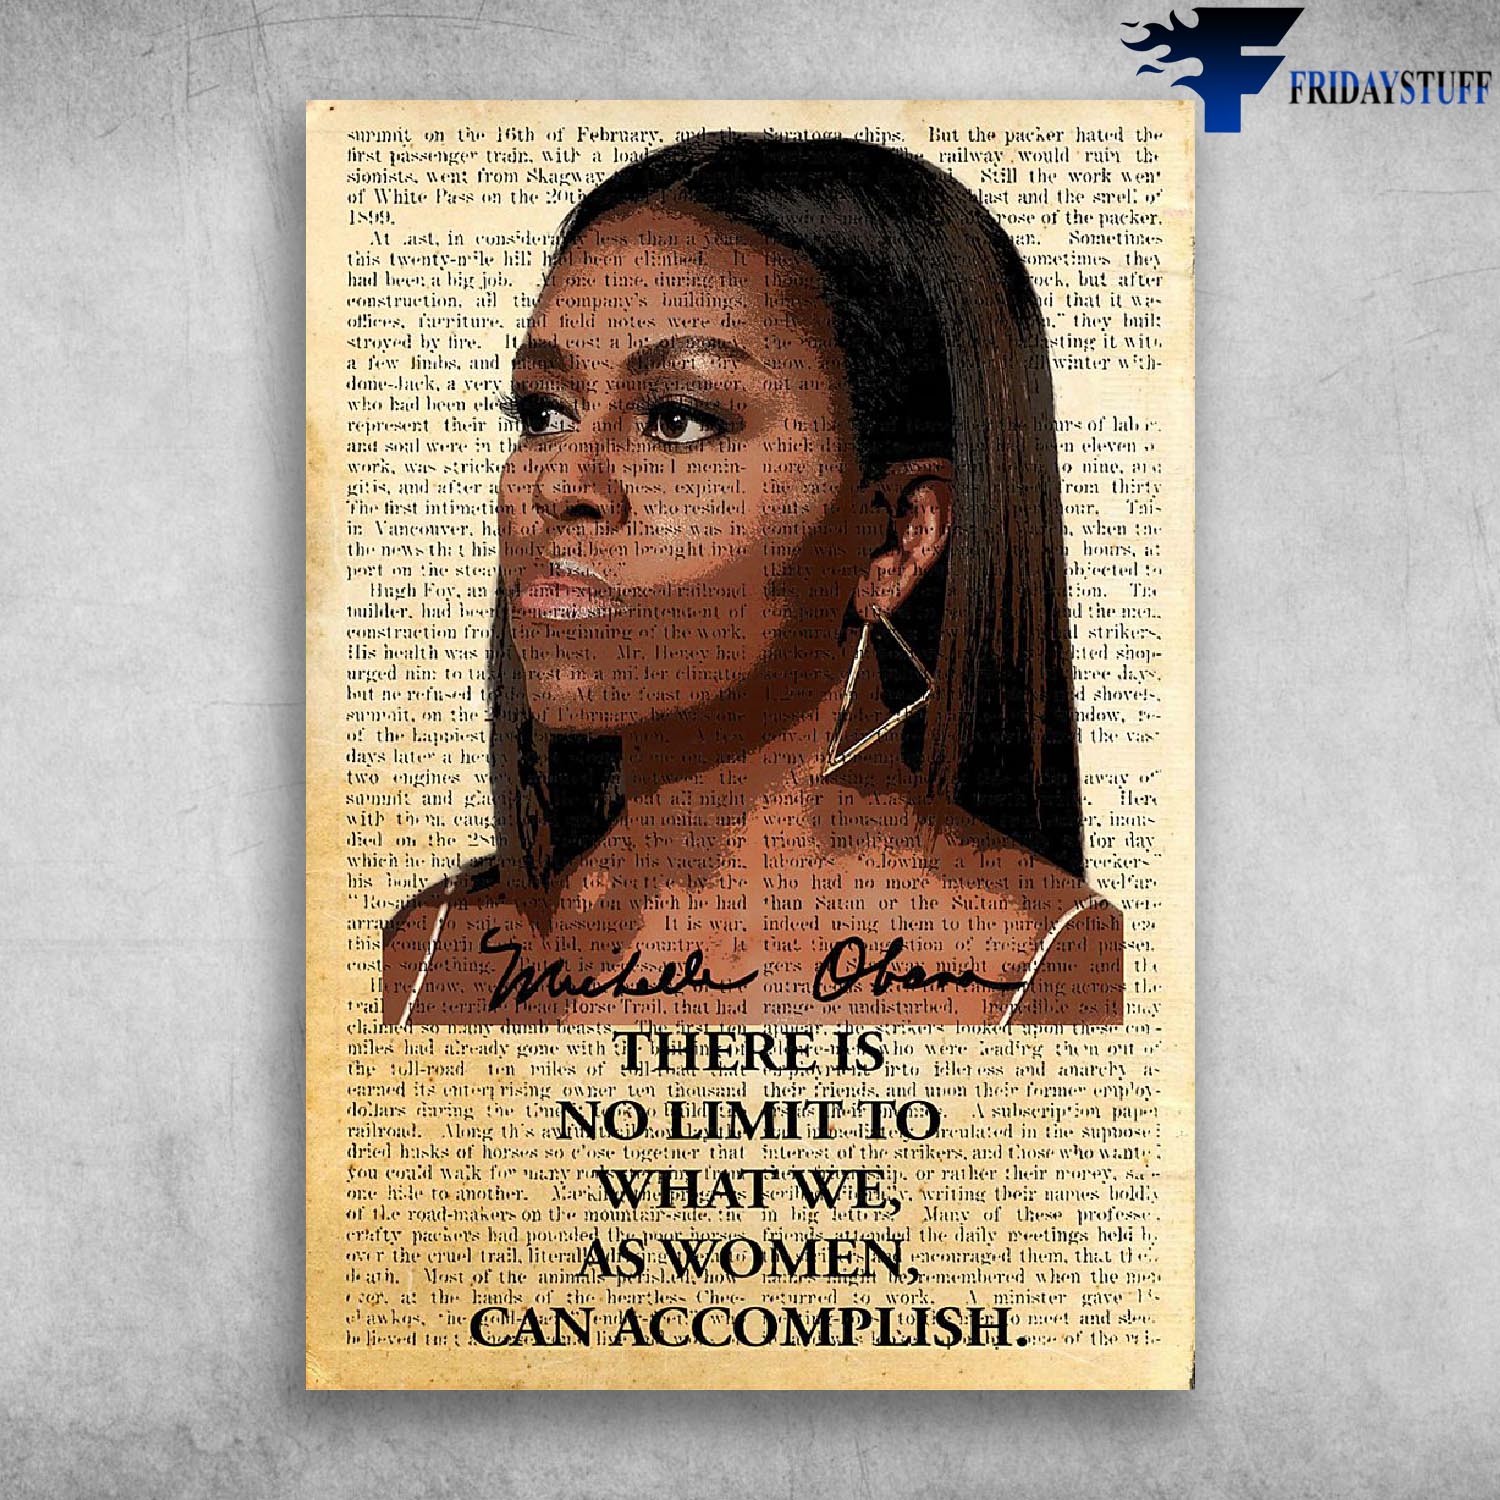 Michelle Obama - There Is No Limit To What We, As Women Can Accomplish.